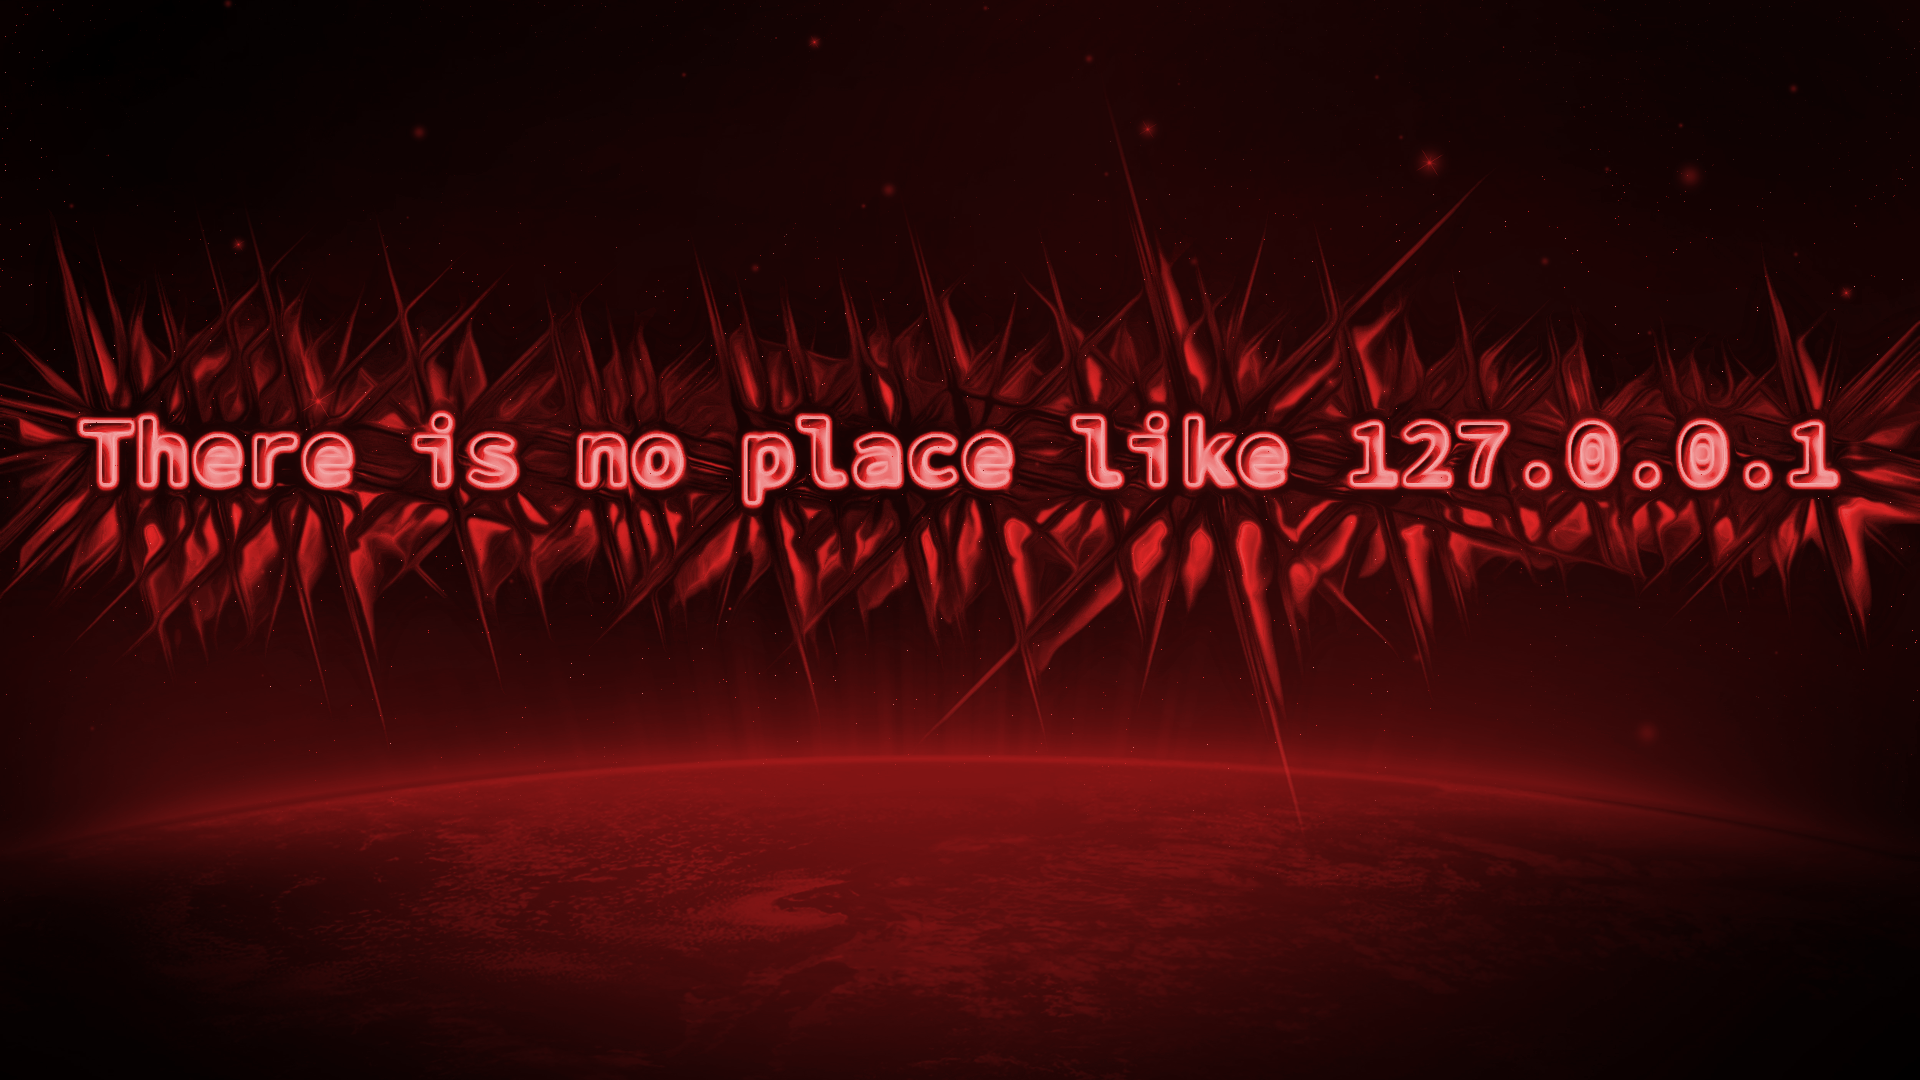 There is No Place Like 127.0.0.1 - Wallpaper Red